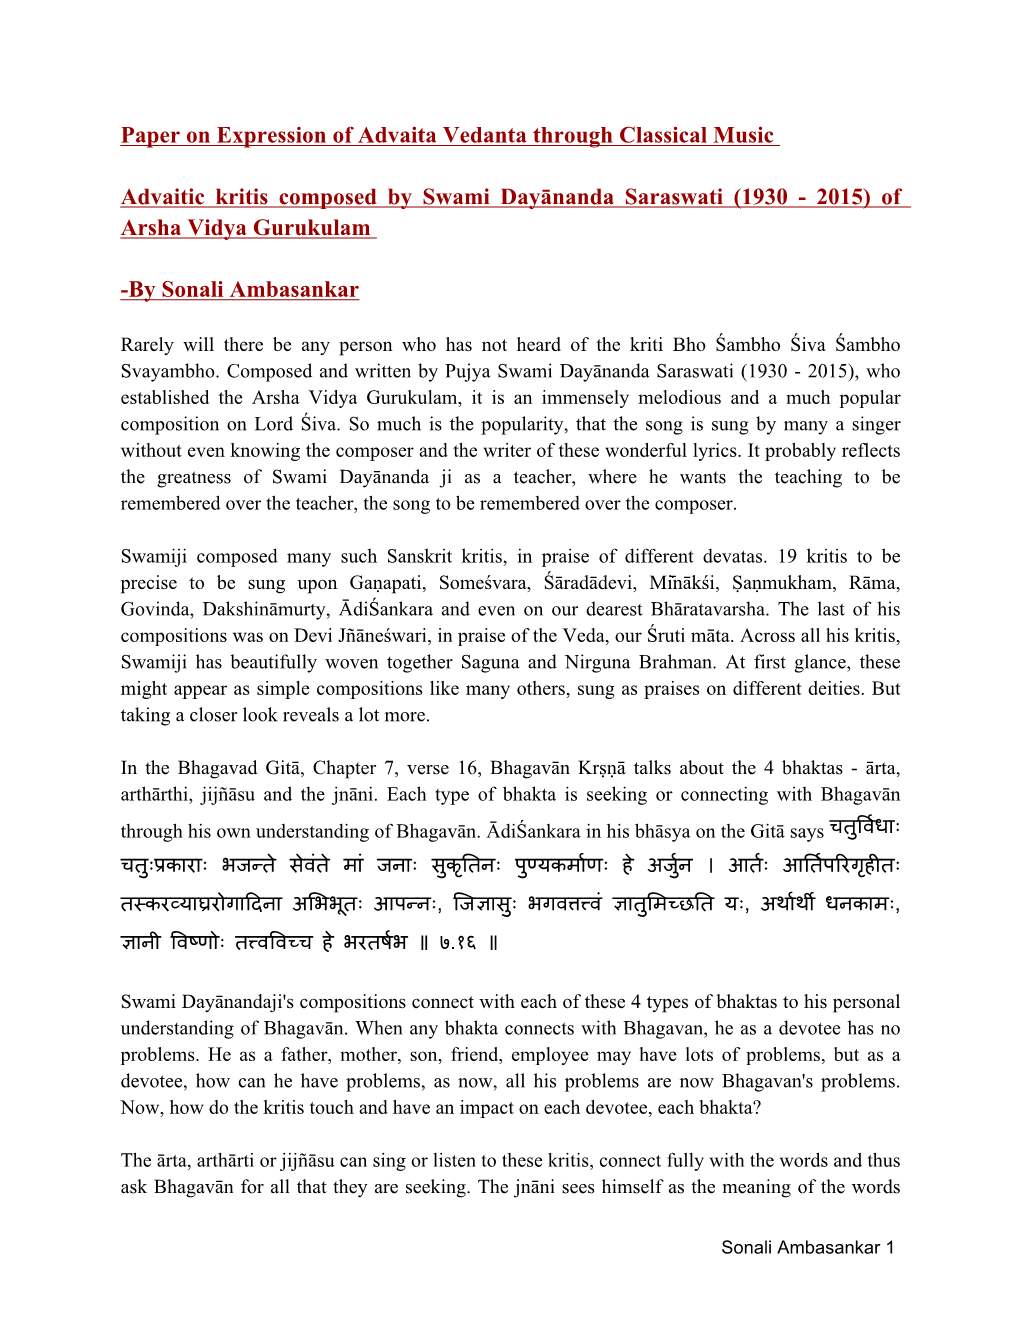 Paper on Expression of Advaita Vedanta Through Classical Music